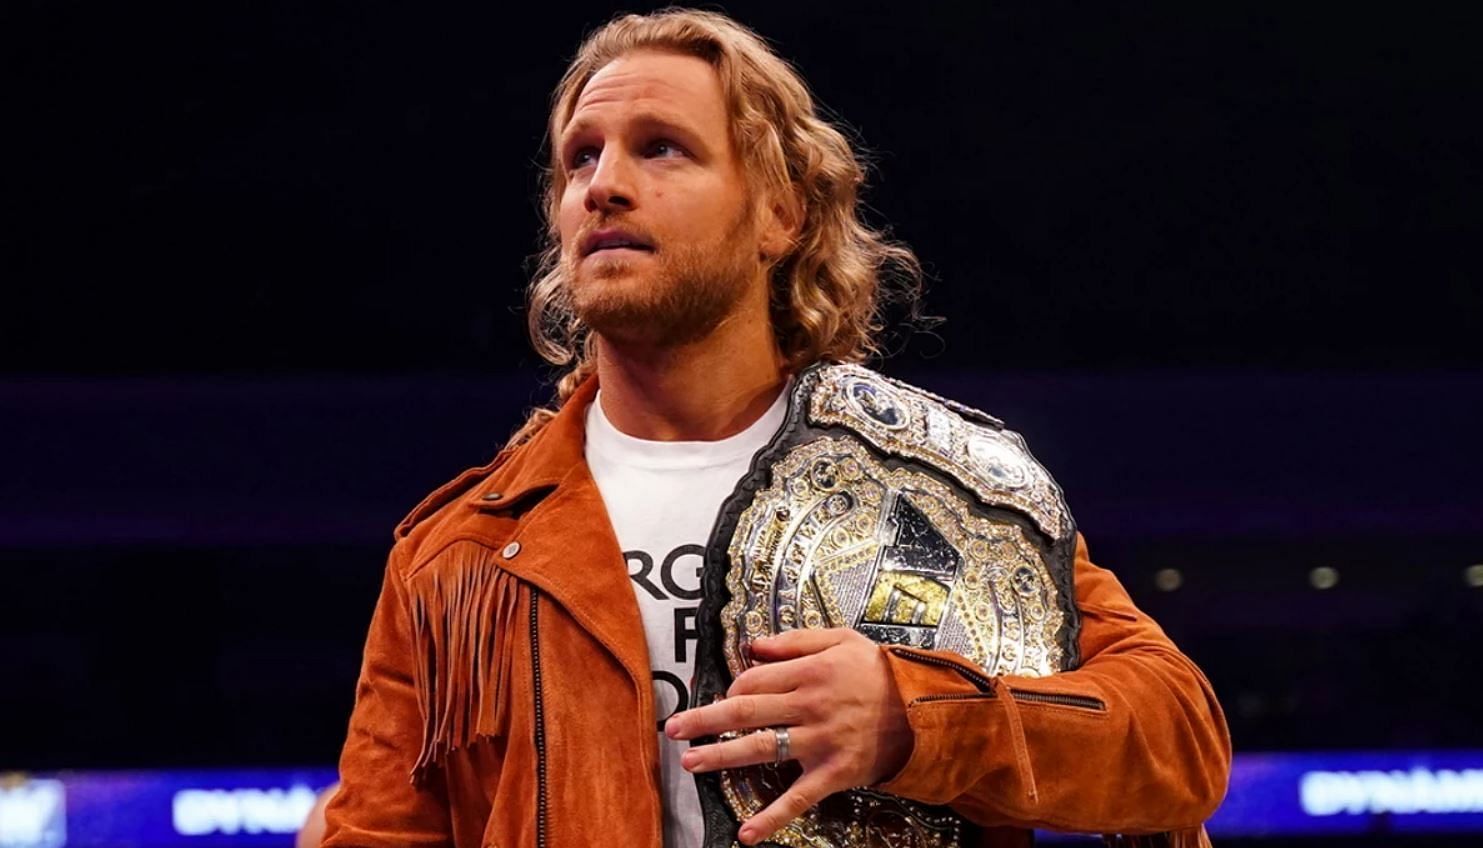 &quot;Hangman&quot; Adam Page is the current AEW World Champion